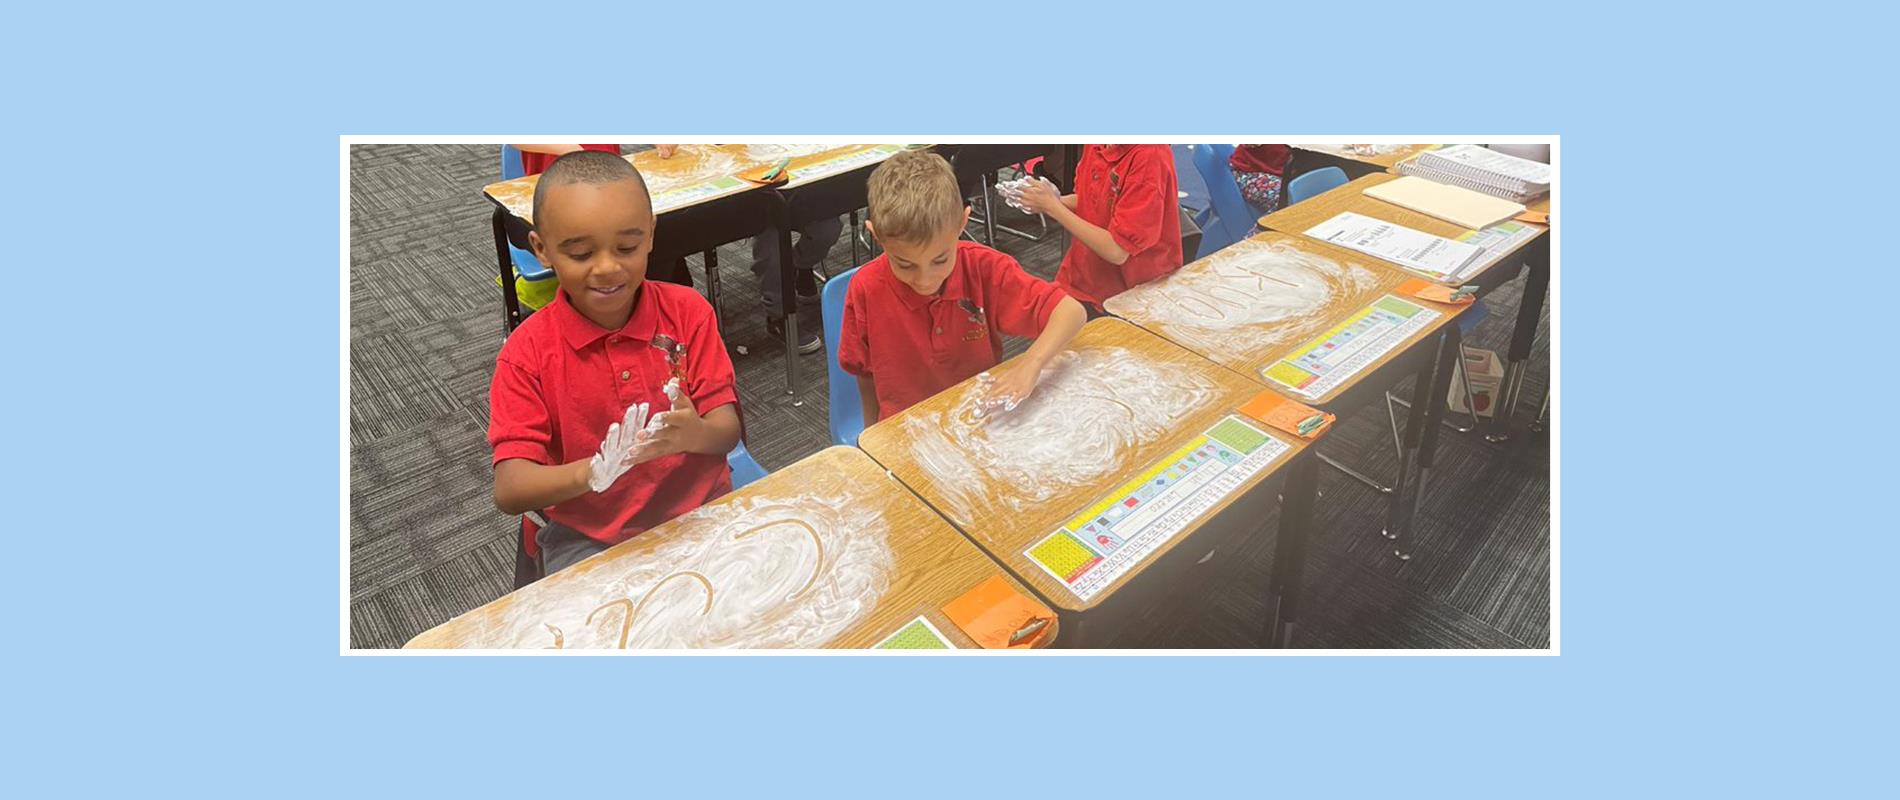 students writing in shaving cream on their desks